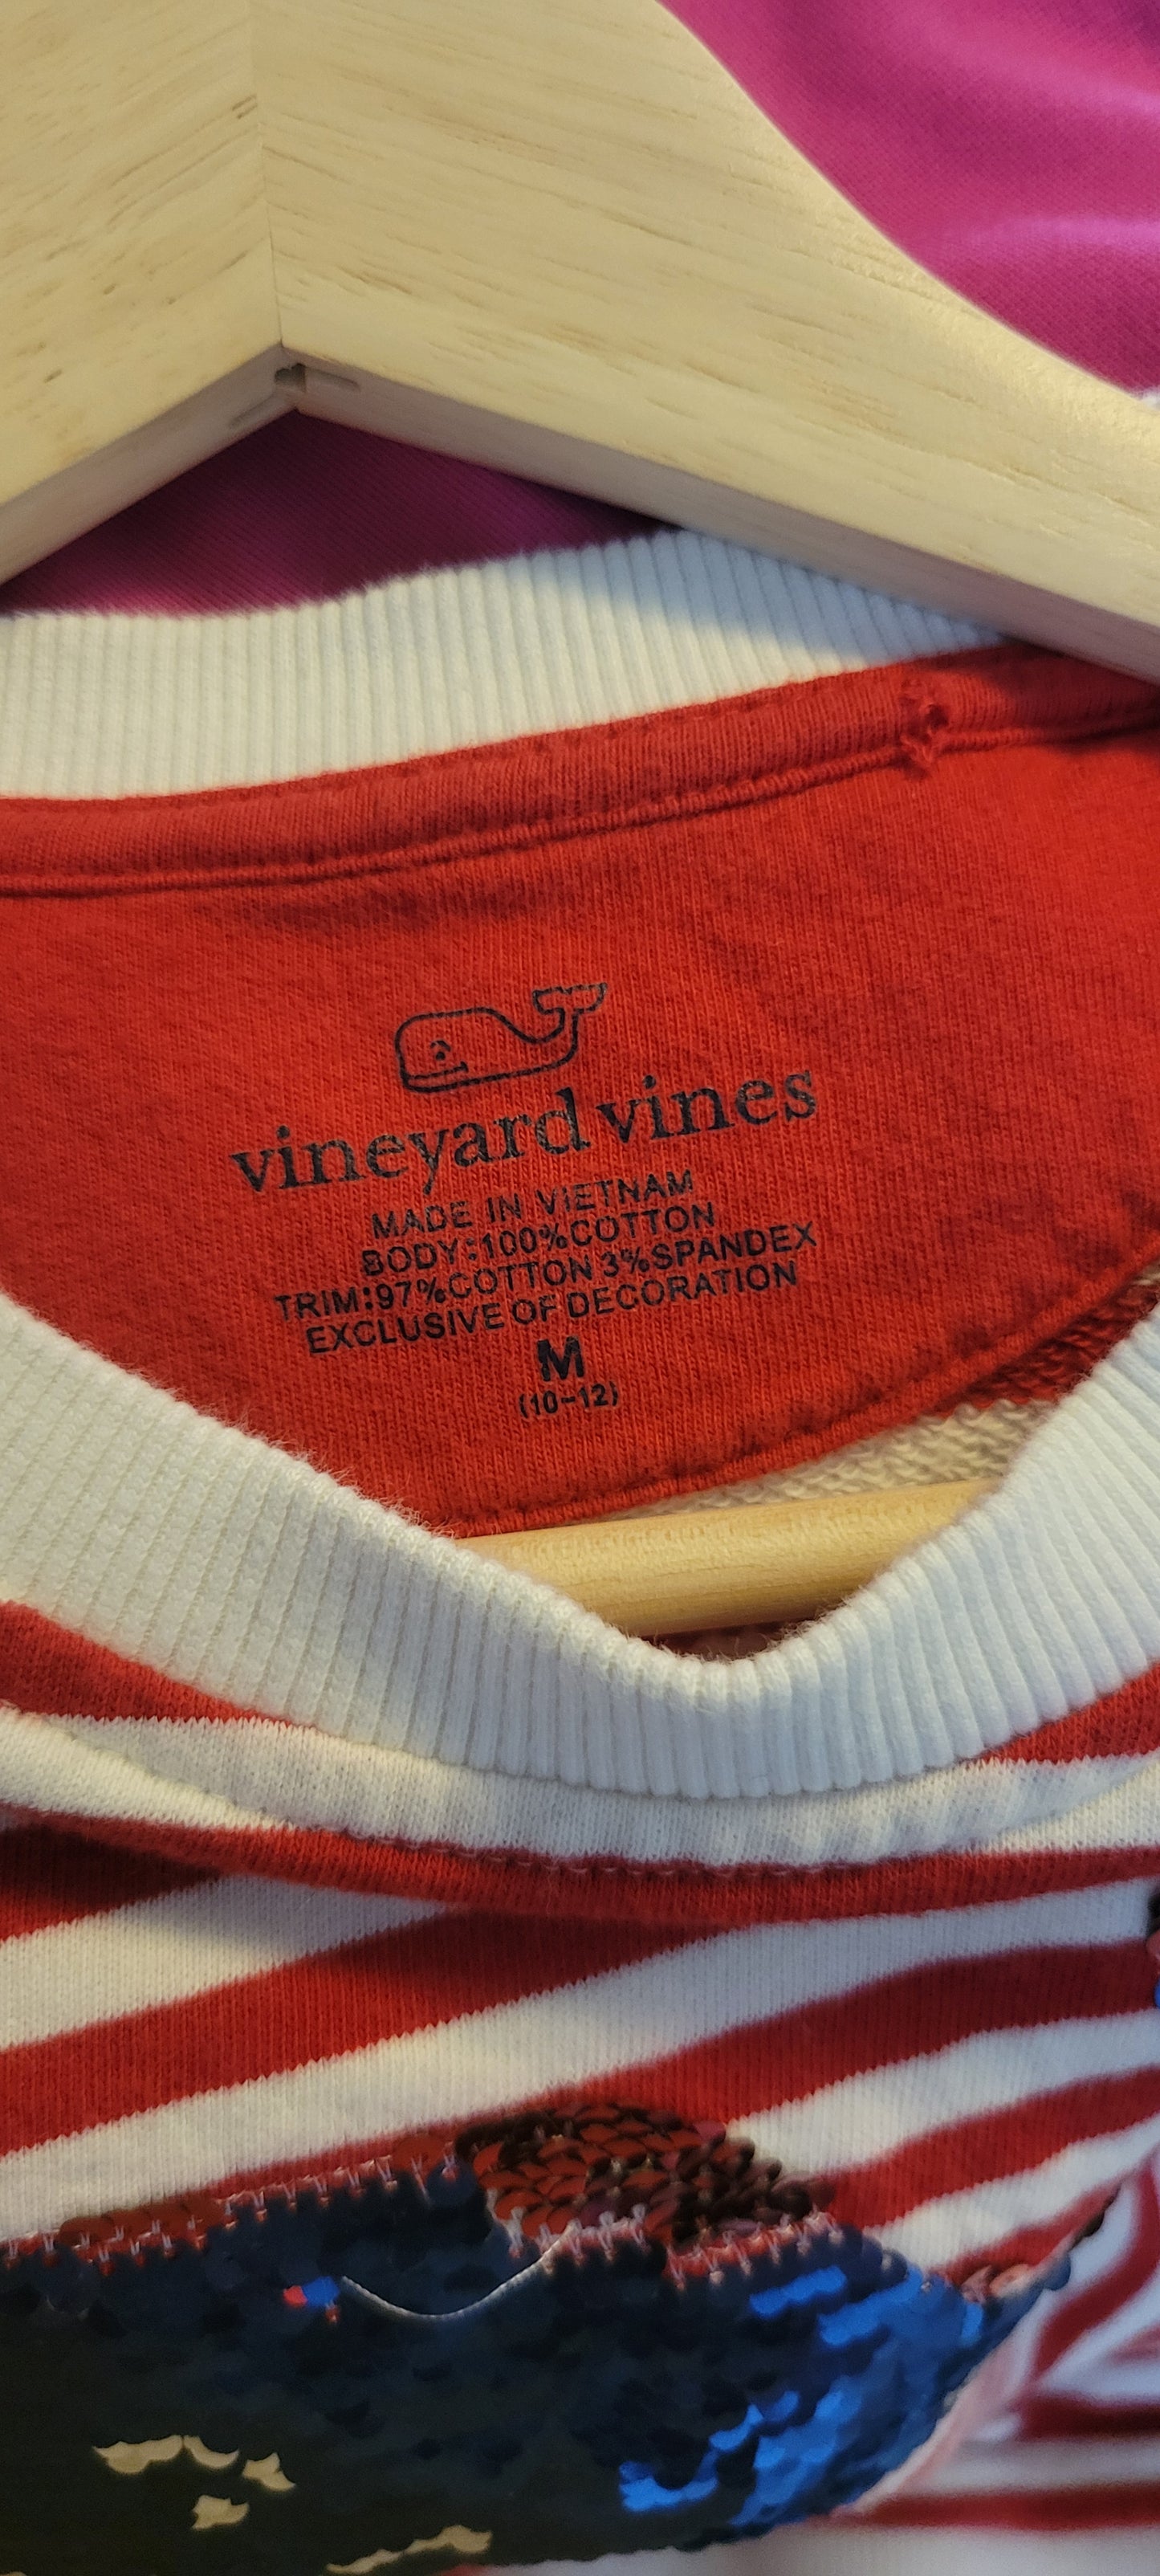 * Reduced * Vineyard Vines Red and White Striped Sequin Whale Sweatshirt, Girls Size M